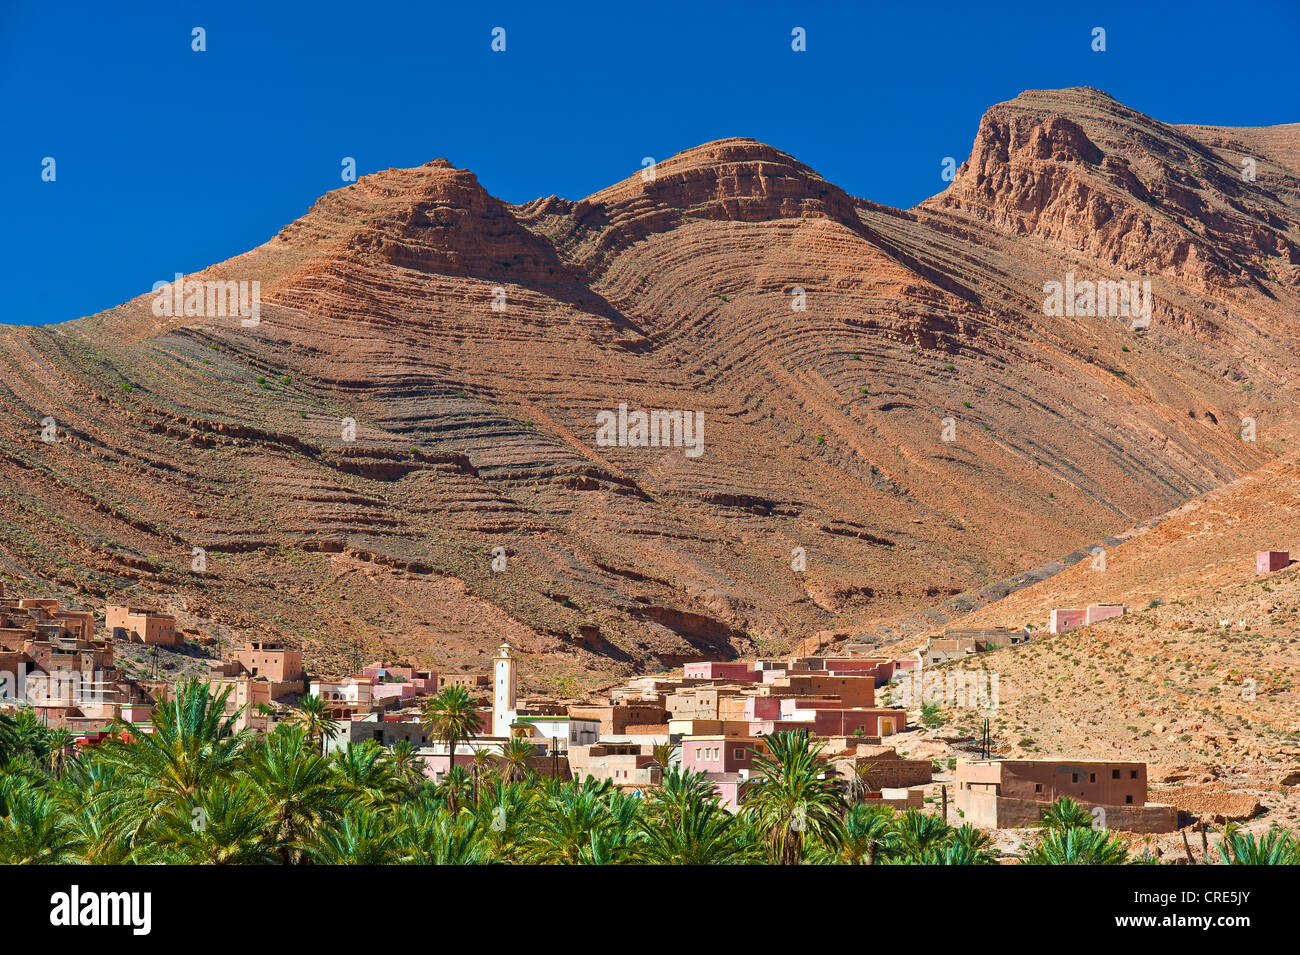 Typical cuesta landscape, mountain slopes characterized by erosion, with small settlements and date palms, Ait Mansour valley Stock Photo